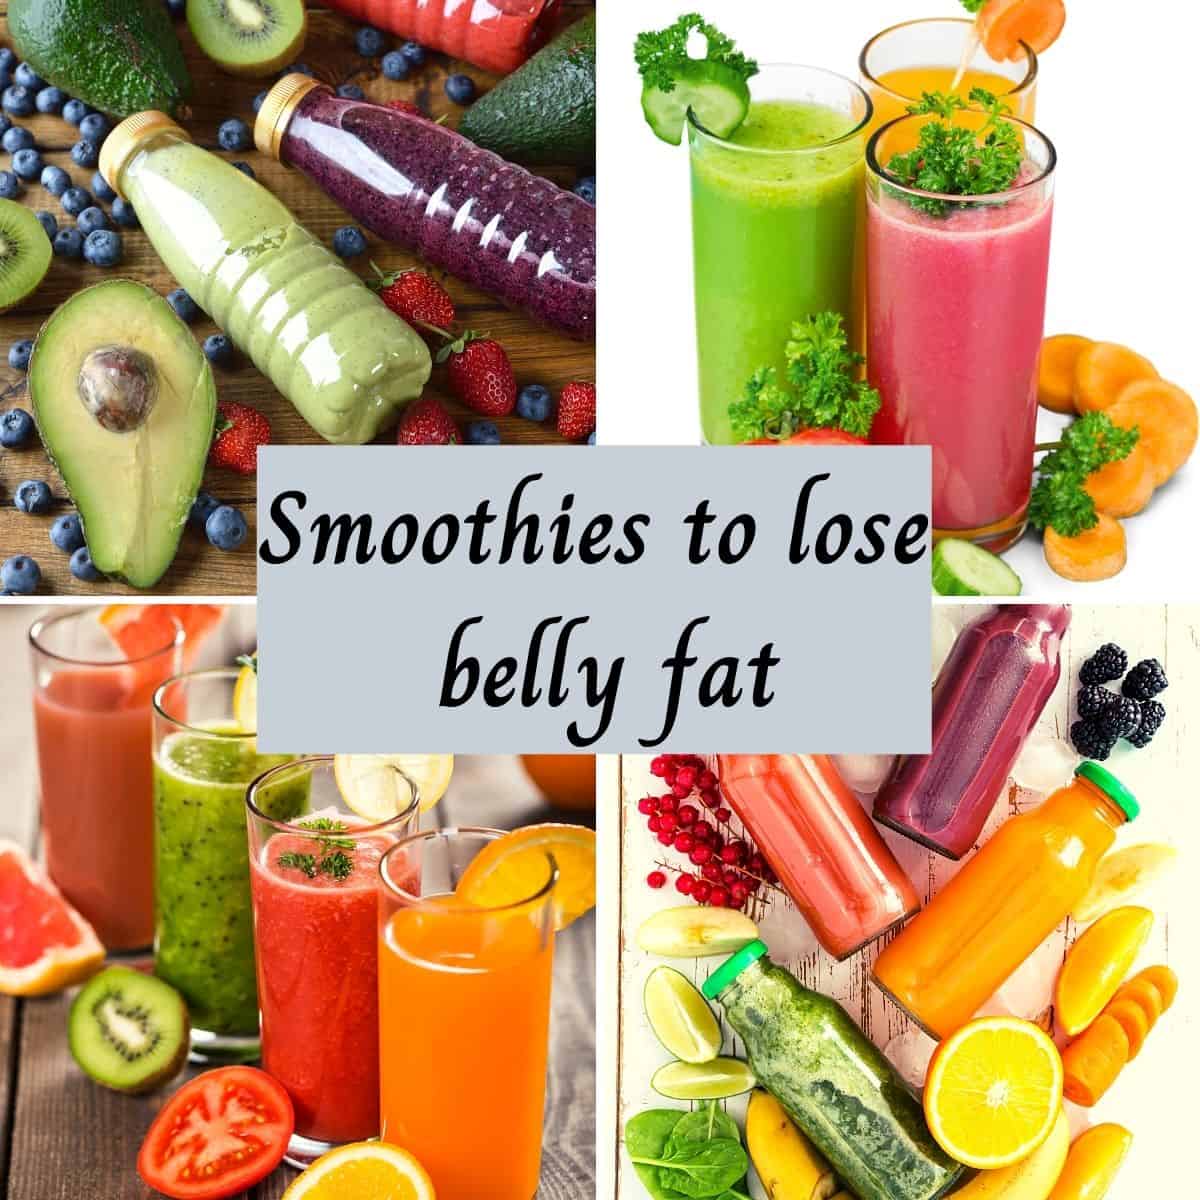 smoothies to lose belly fat fast recipes - Yummy Indian Kitchen